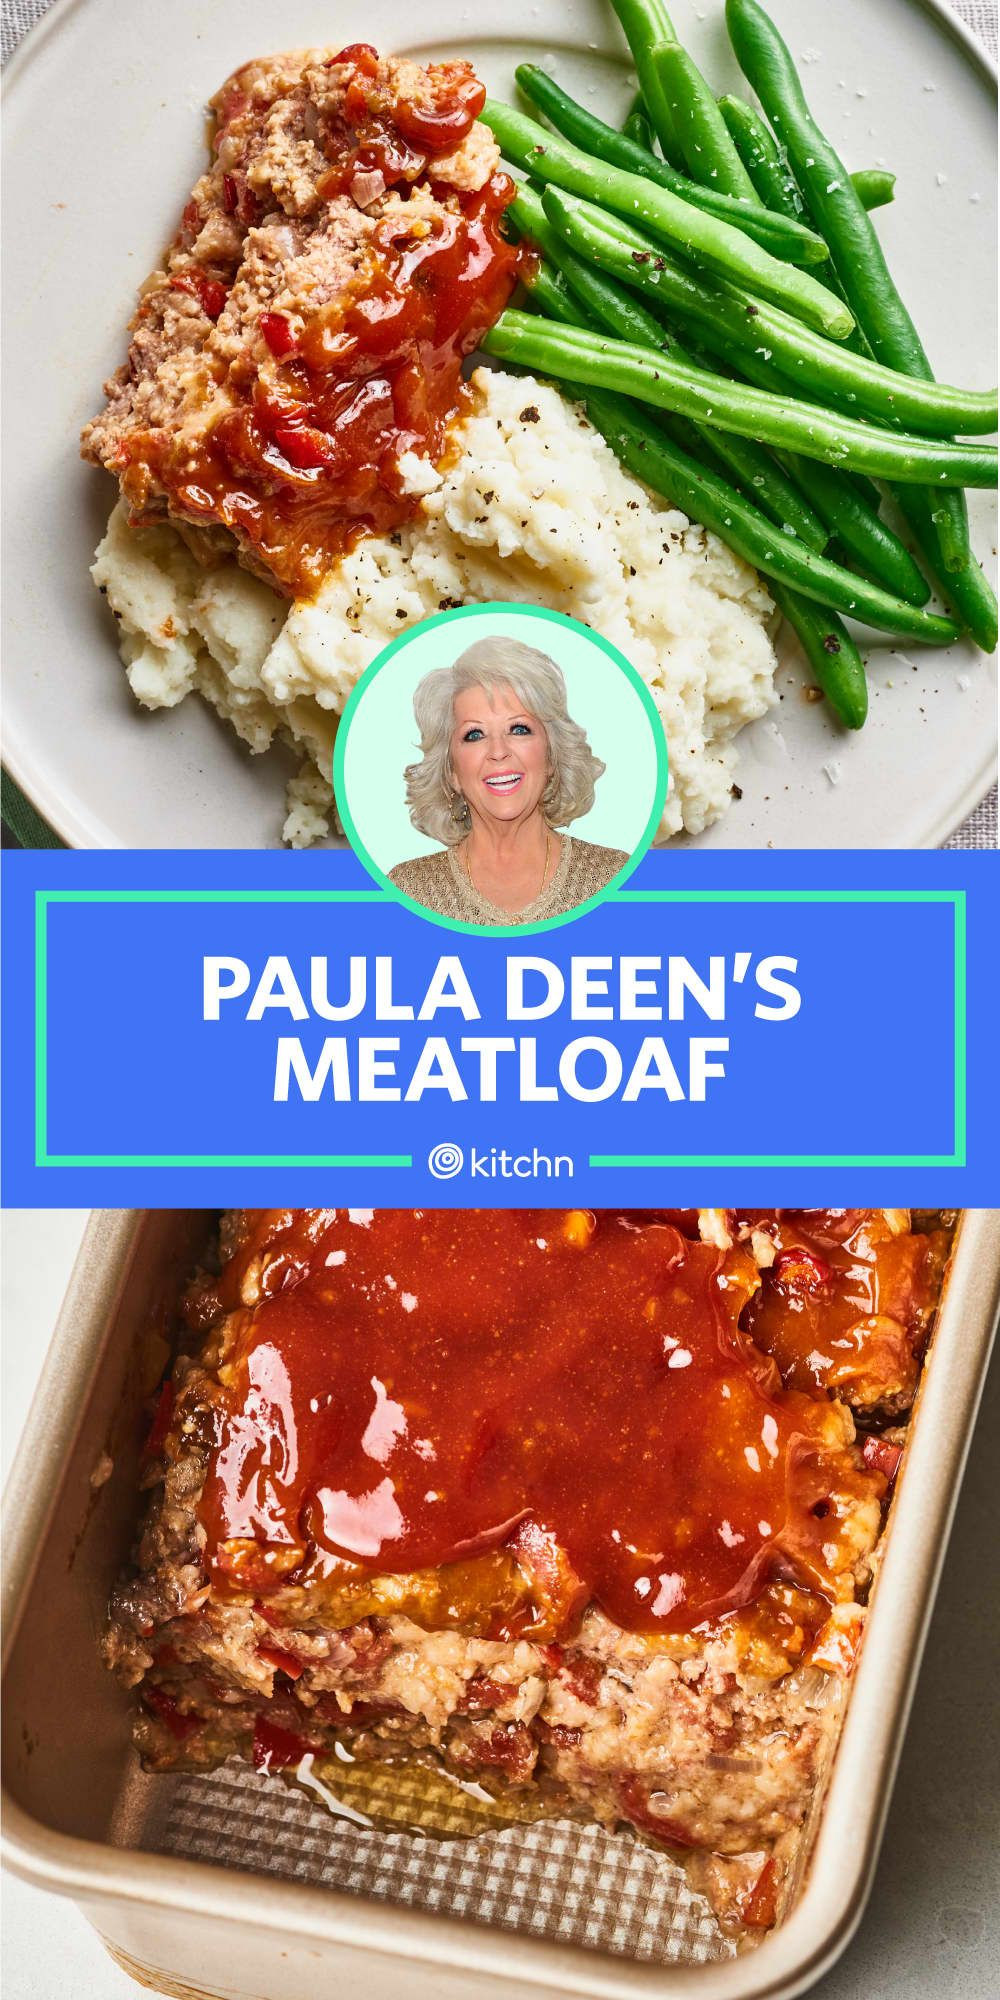 Southern Meatloaf Recipe Paula Deen
 Why I Won’t Be Making Paula Deen’s Meatloaf Again in 2020